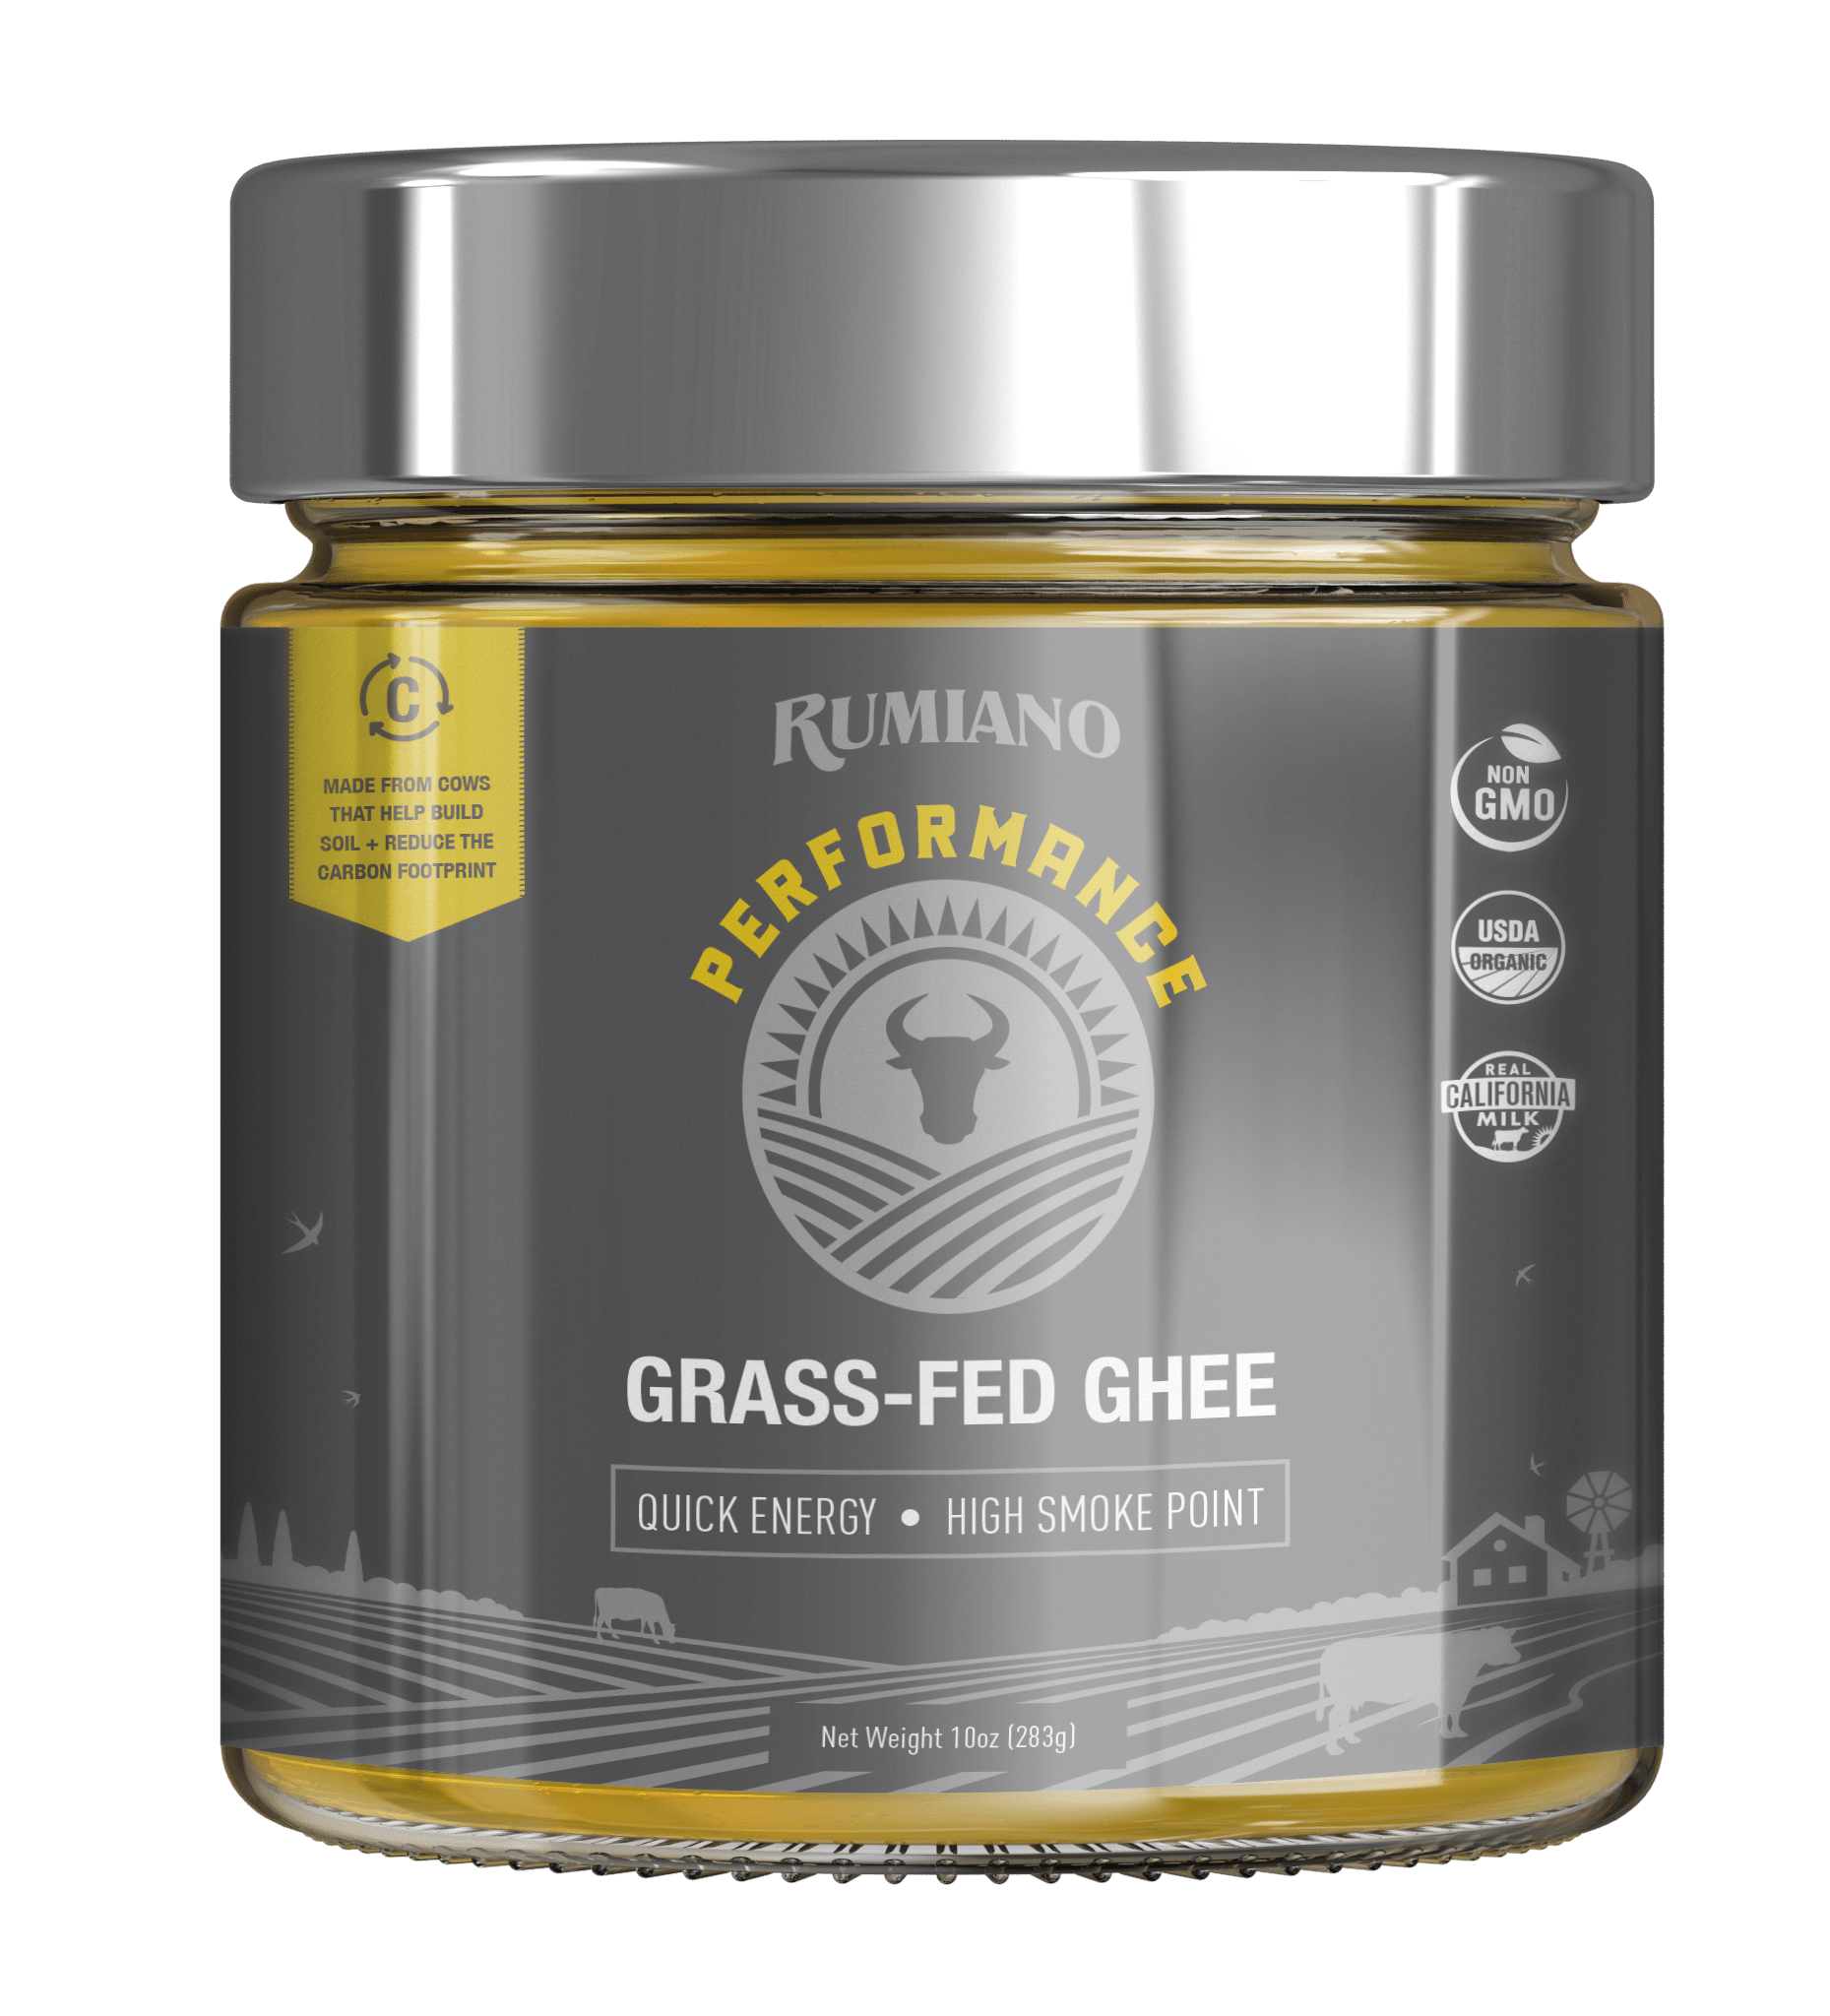 Rumiano Cheese Company Introduces Grass-Fed Ghee and Regen Butter | NOSH